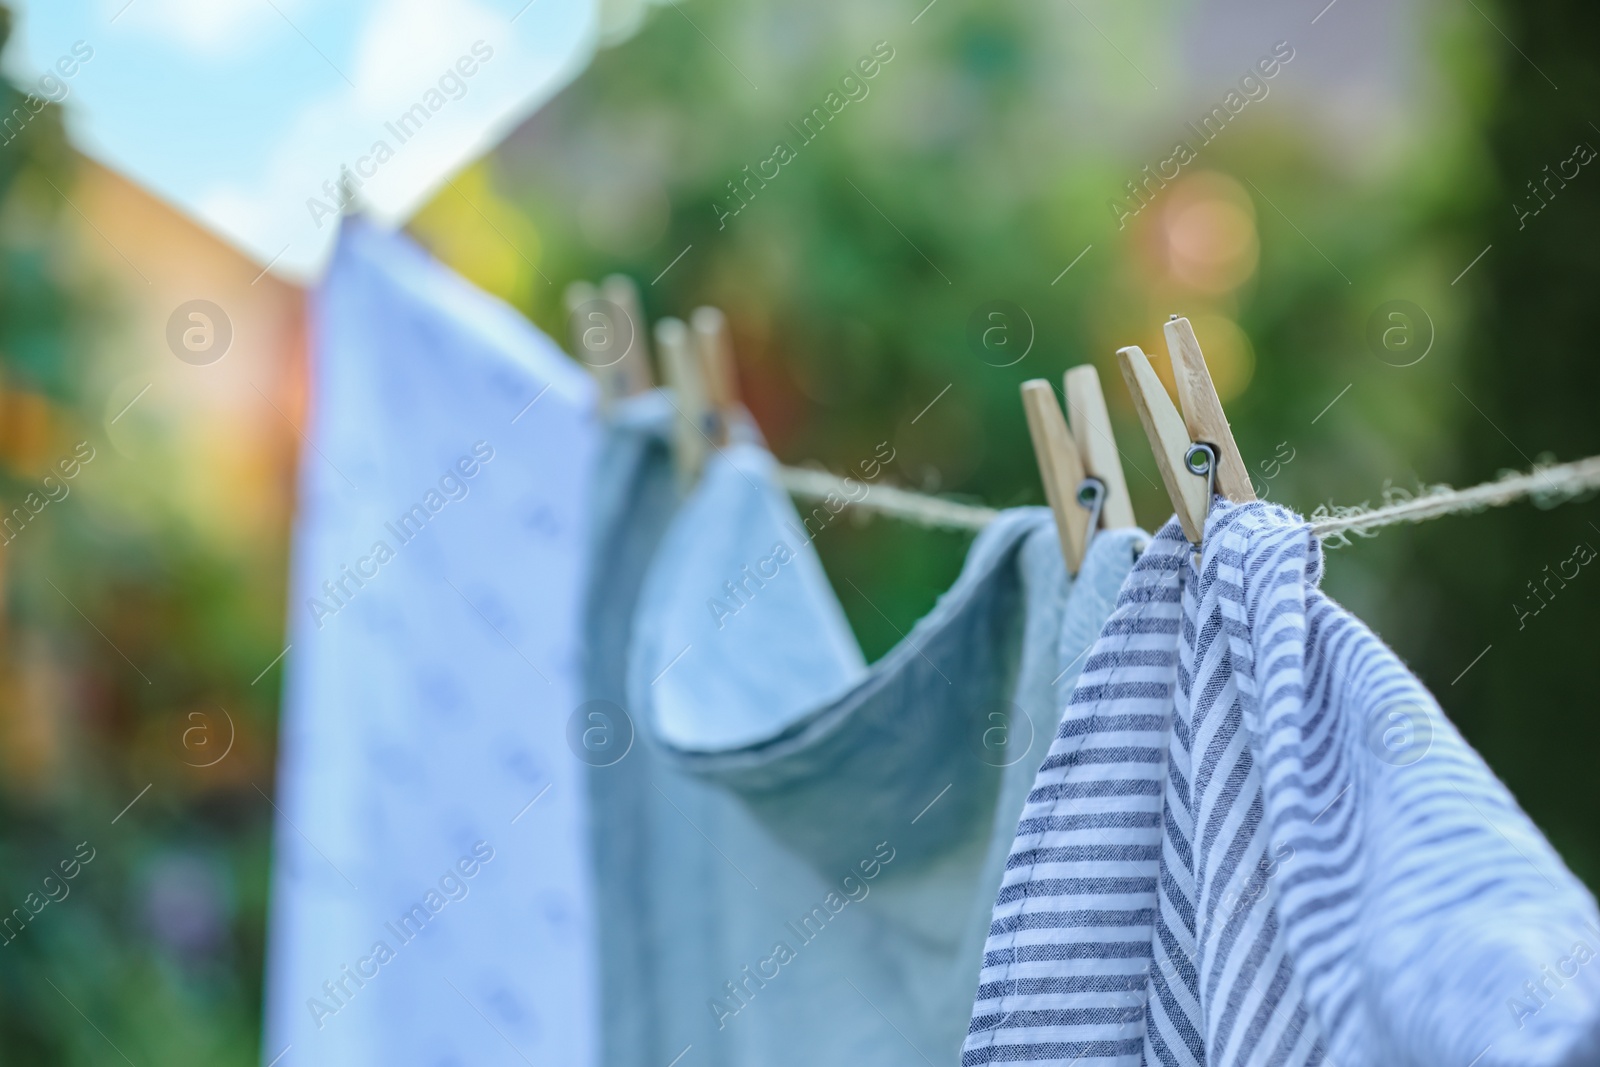 Photo of Washing line with drying shirts against blurred background, focus on clothespin